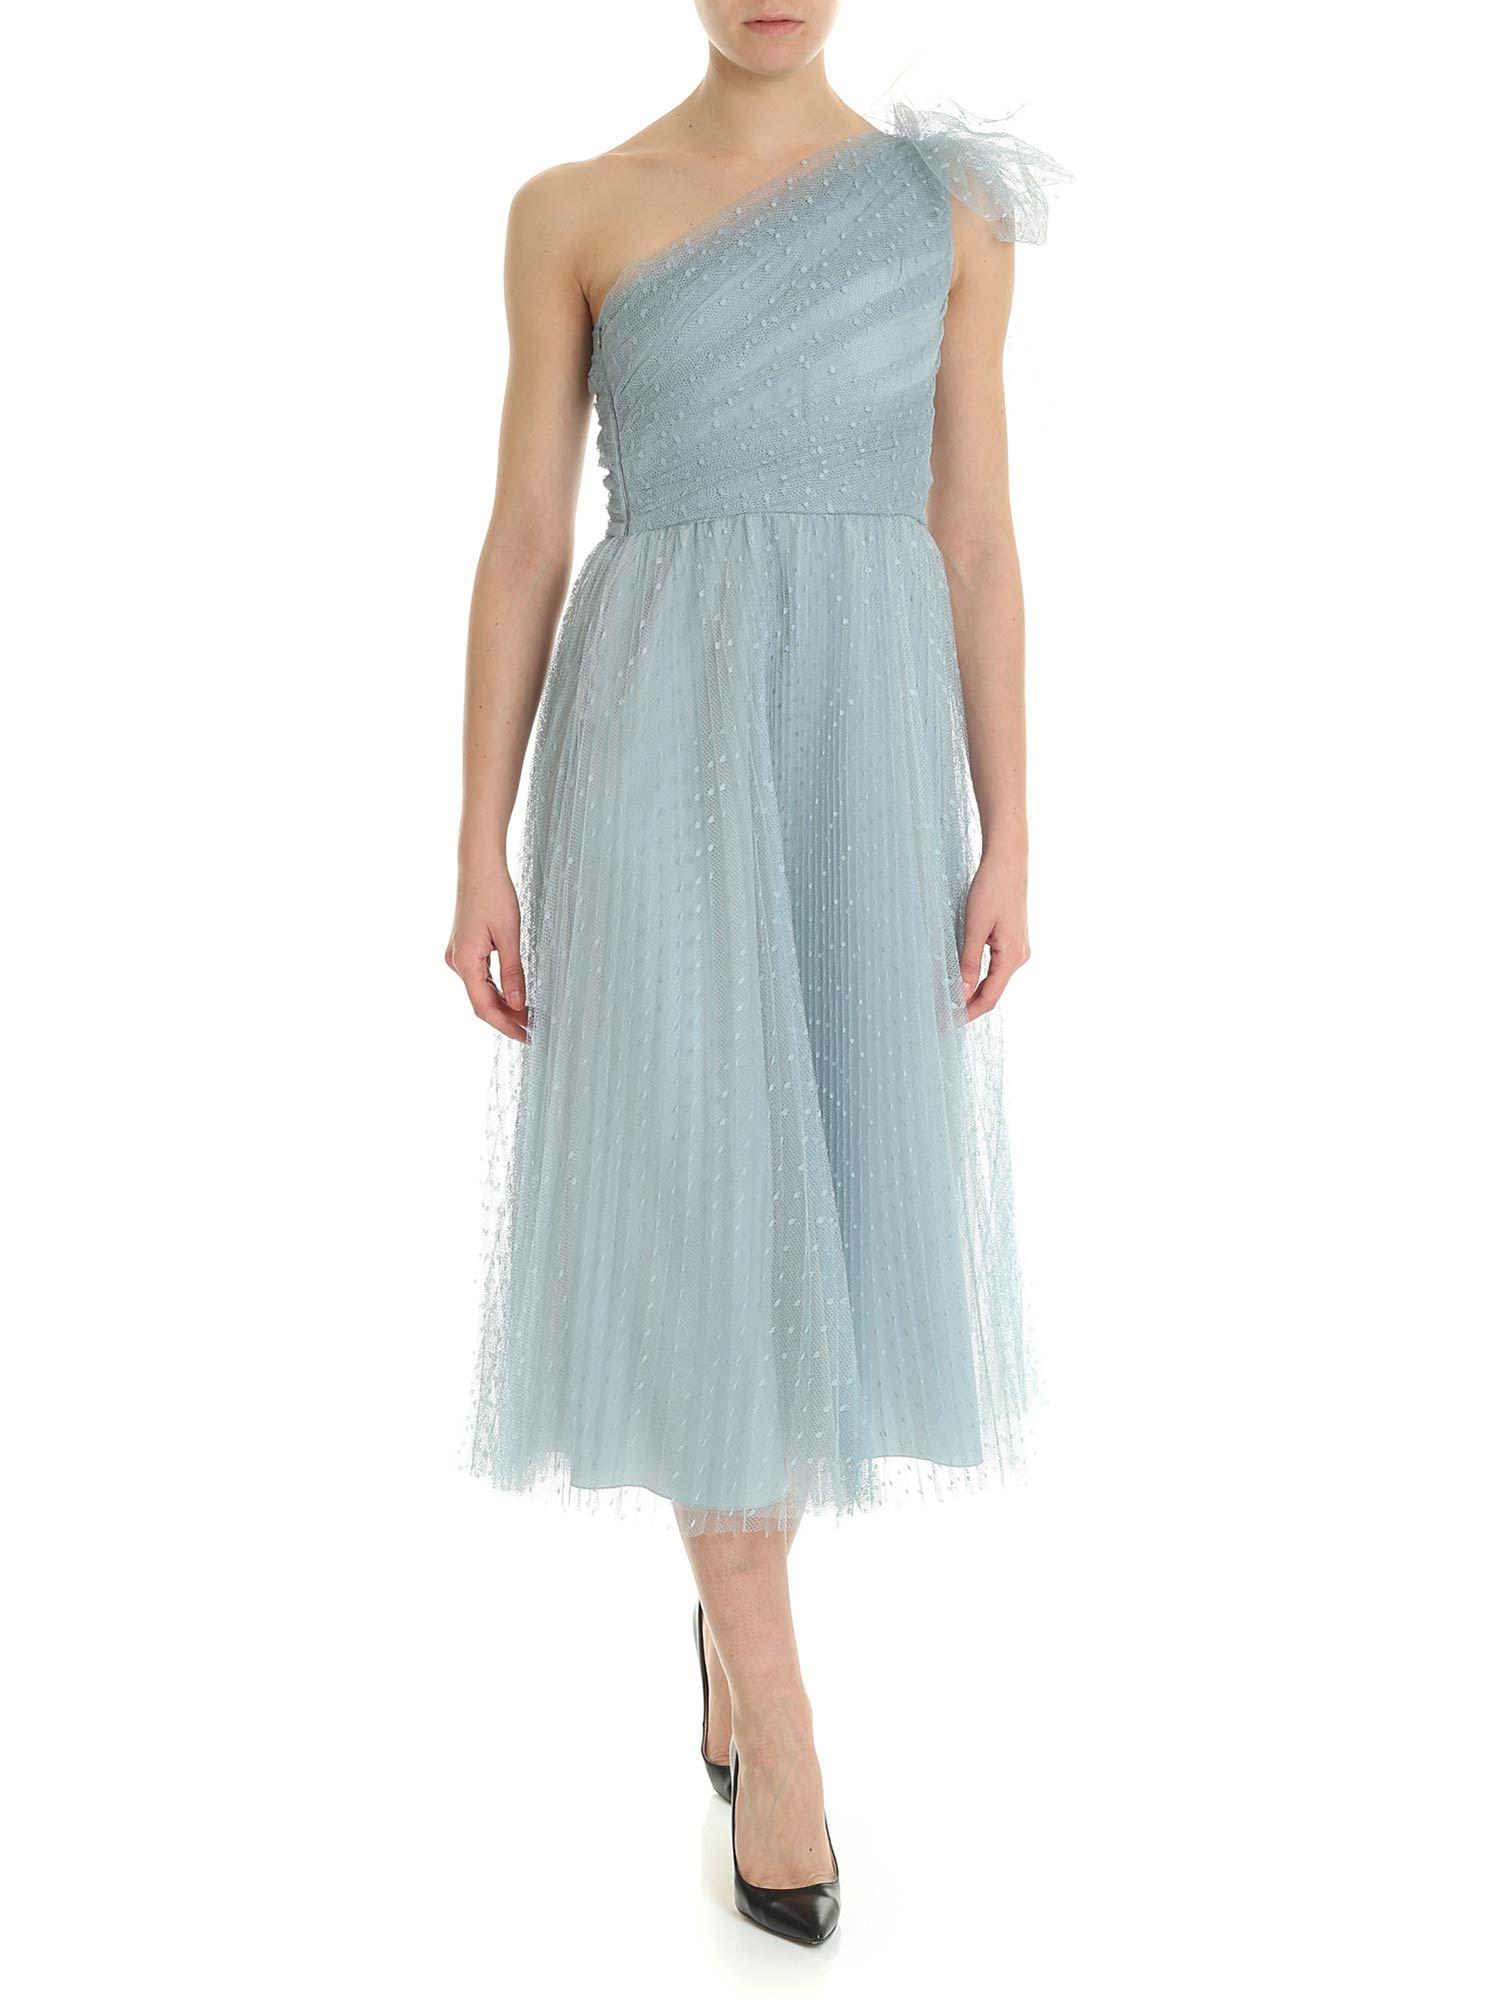 RED Valentino Tulle Light Blue Pleated Dress in Red - Lyst